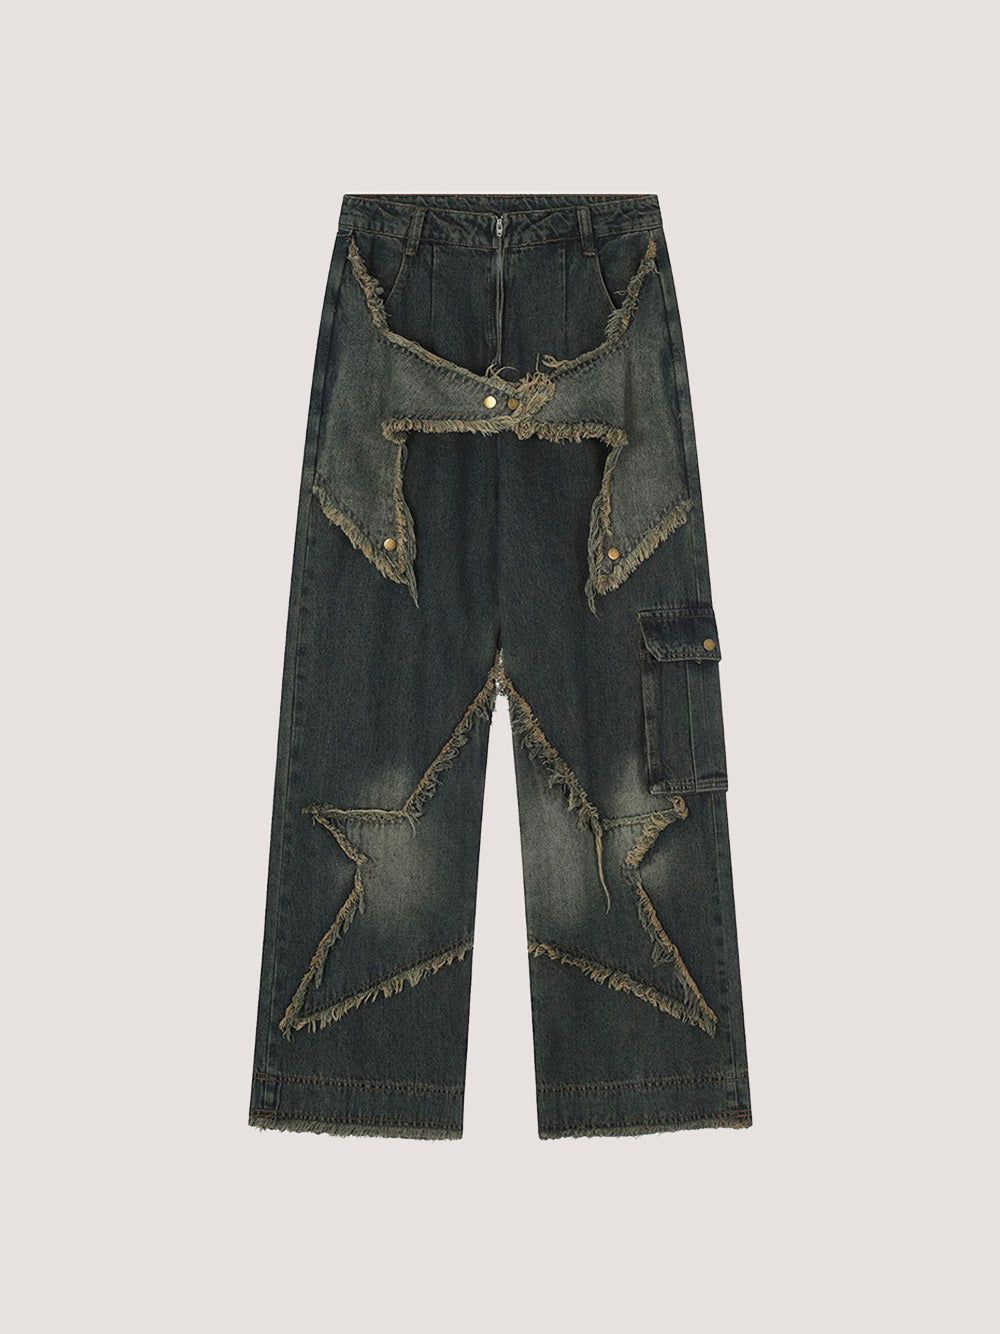 Denim pants, classic style for all ages!